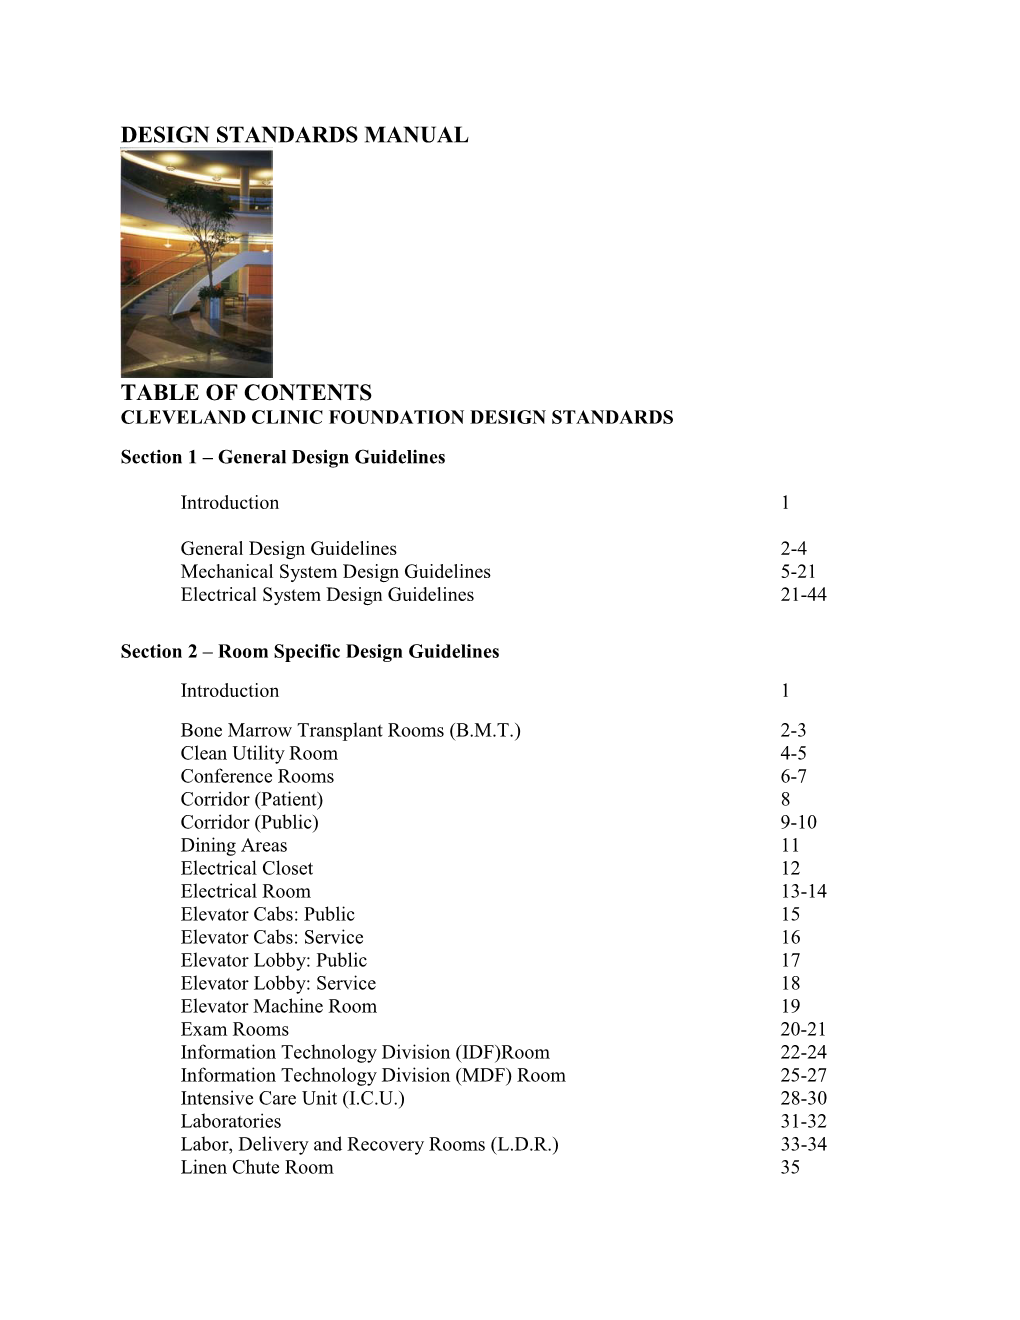 Design Standards Manual Table of Contents